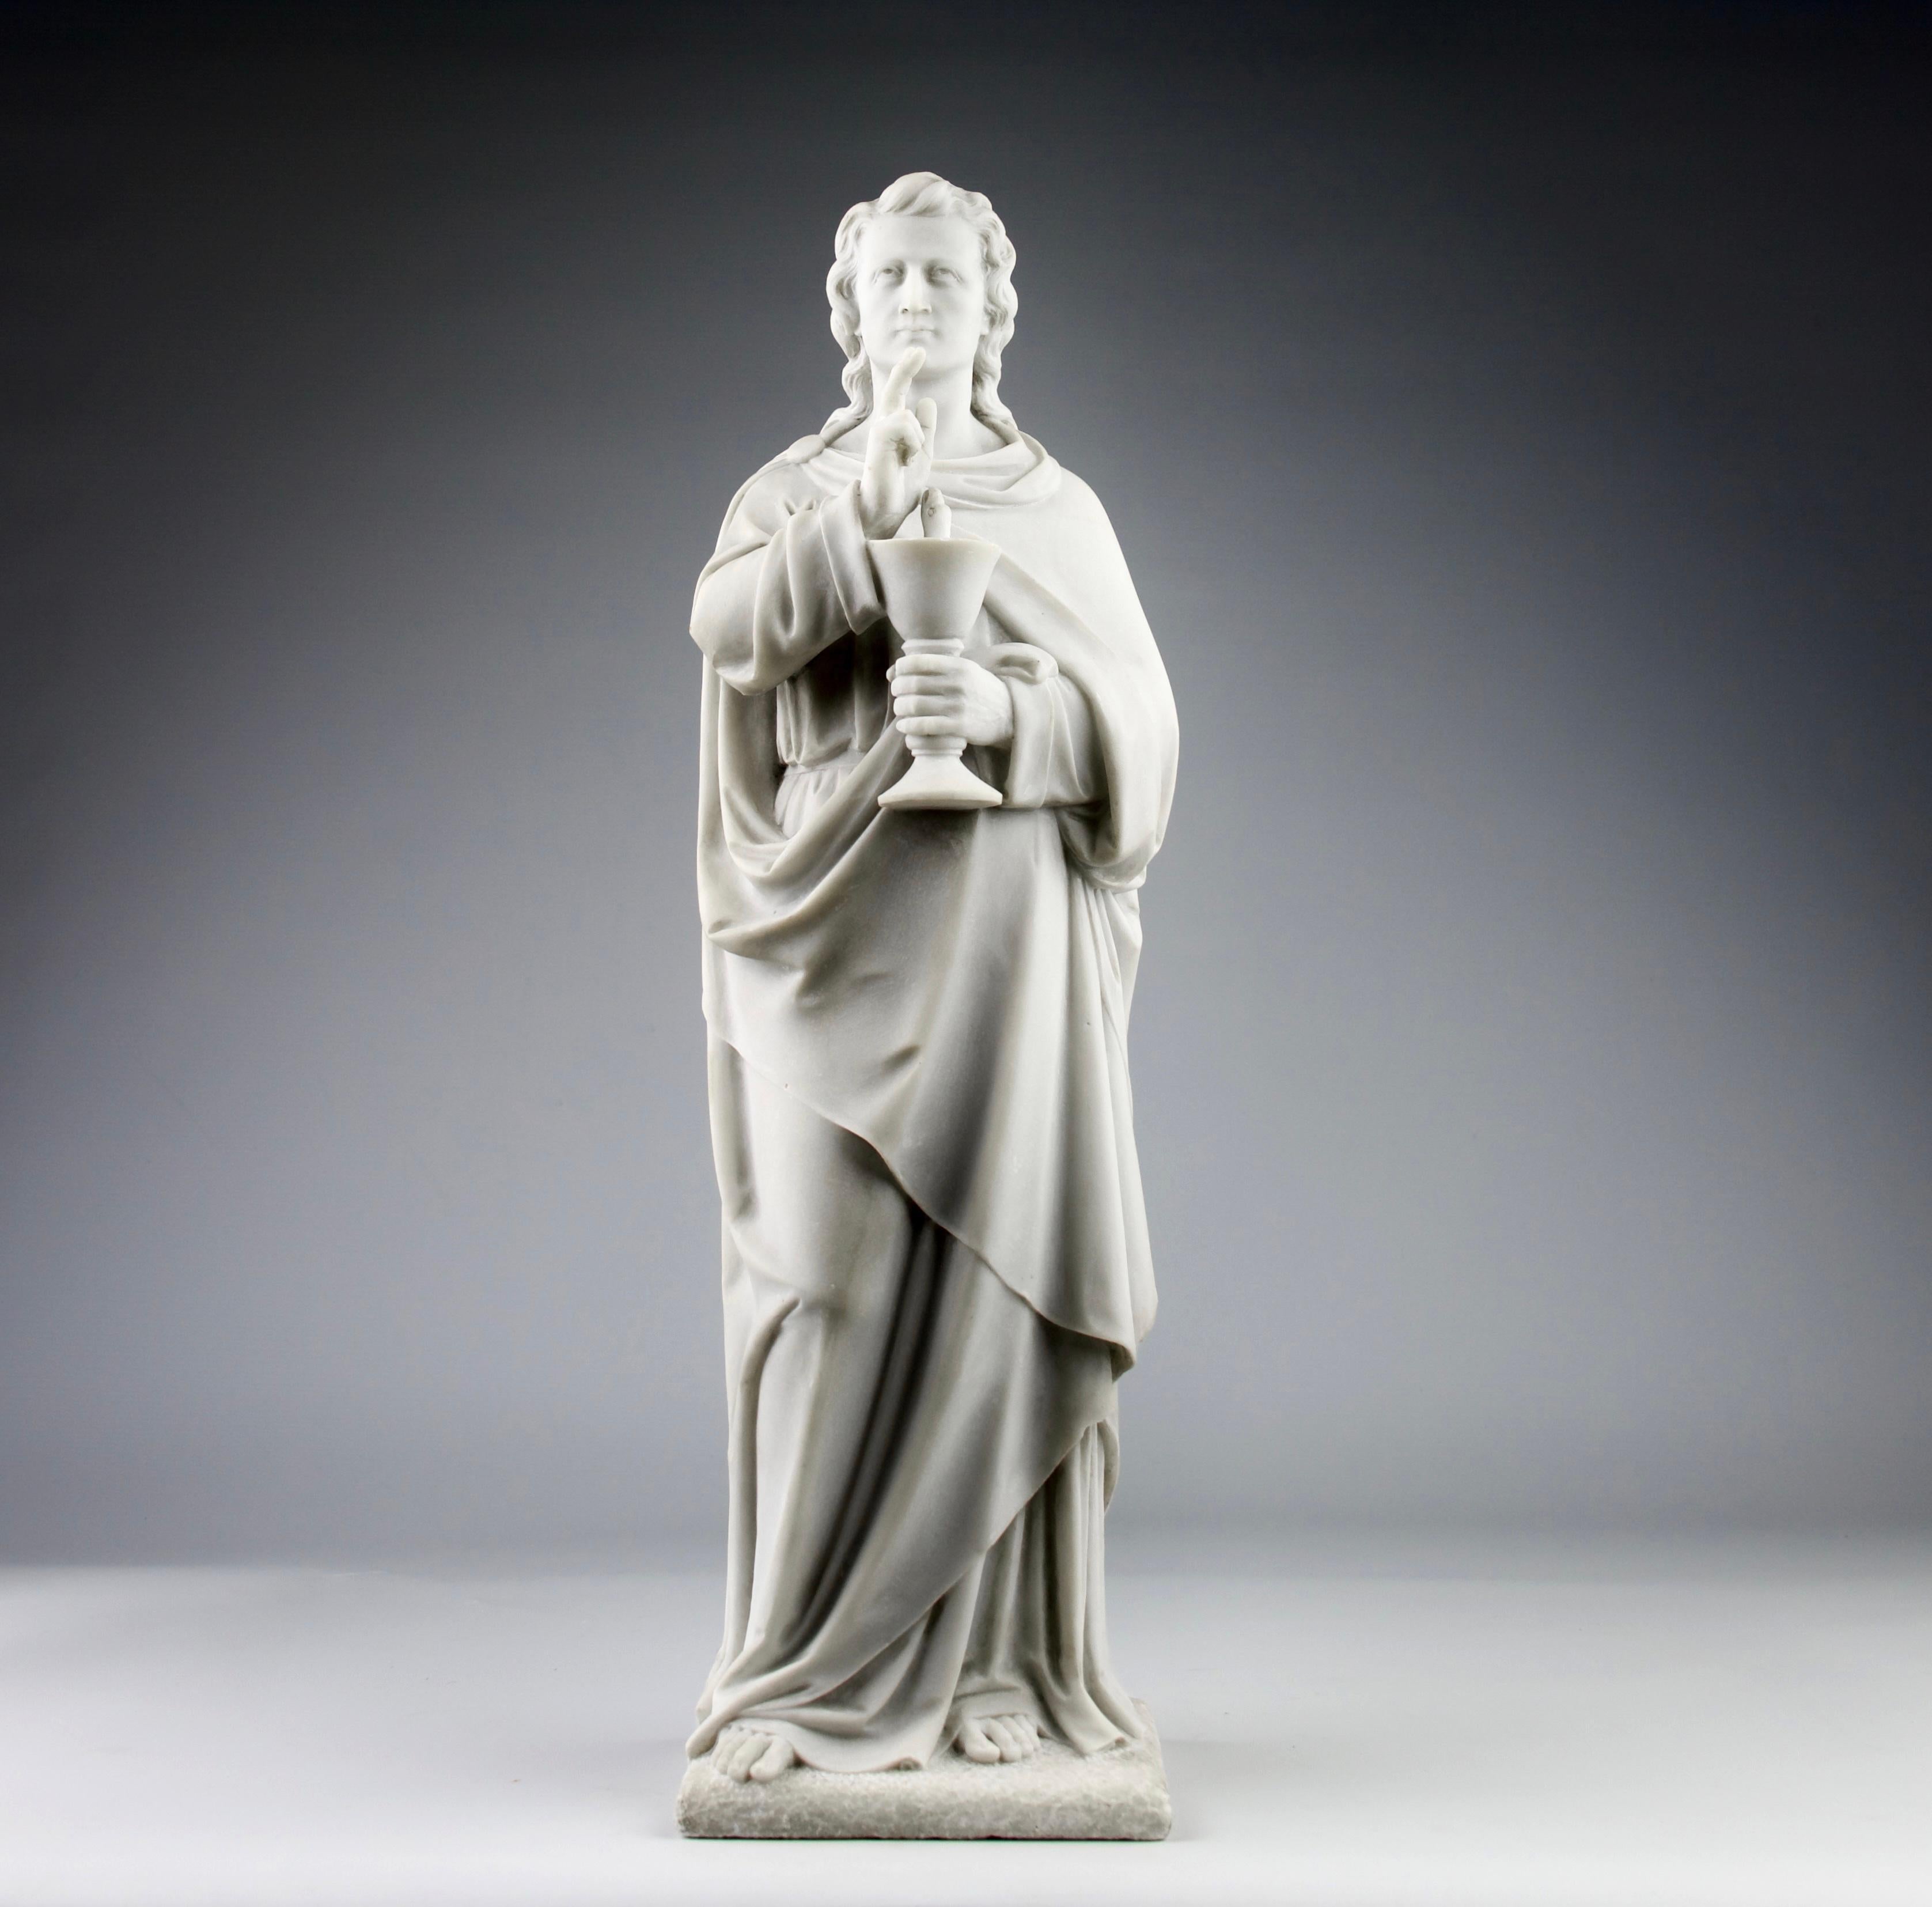 Superb sculpture in marble of Saint John the Evangelist, France 19th century.

Dimensions in cm ( H x L x l ) : 58 x 18 x 16

Secure shipping.